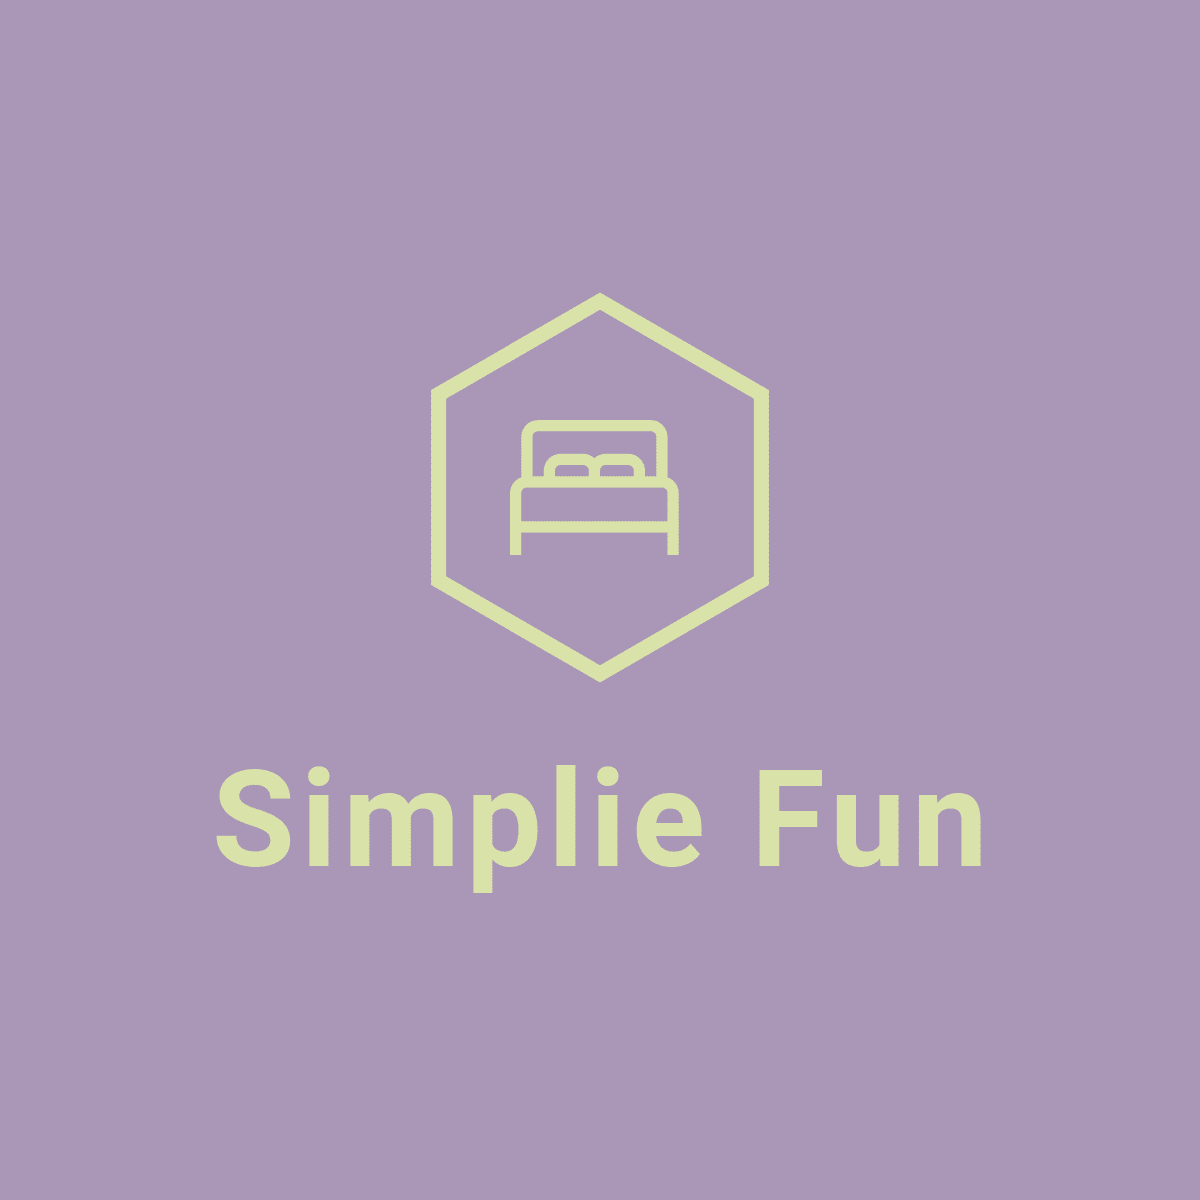 Simplie Fun for all your indoor and outdoor furniture and furnishings needs! Whether it's at home, in the office, classroom, or anywhere else, enhance your space today!